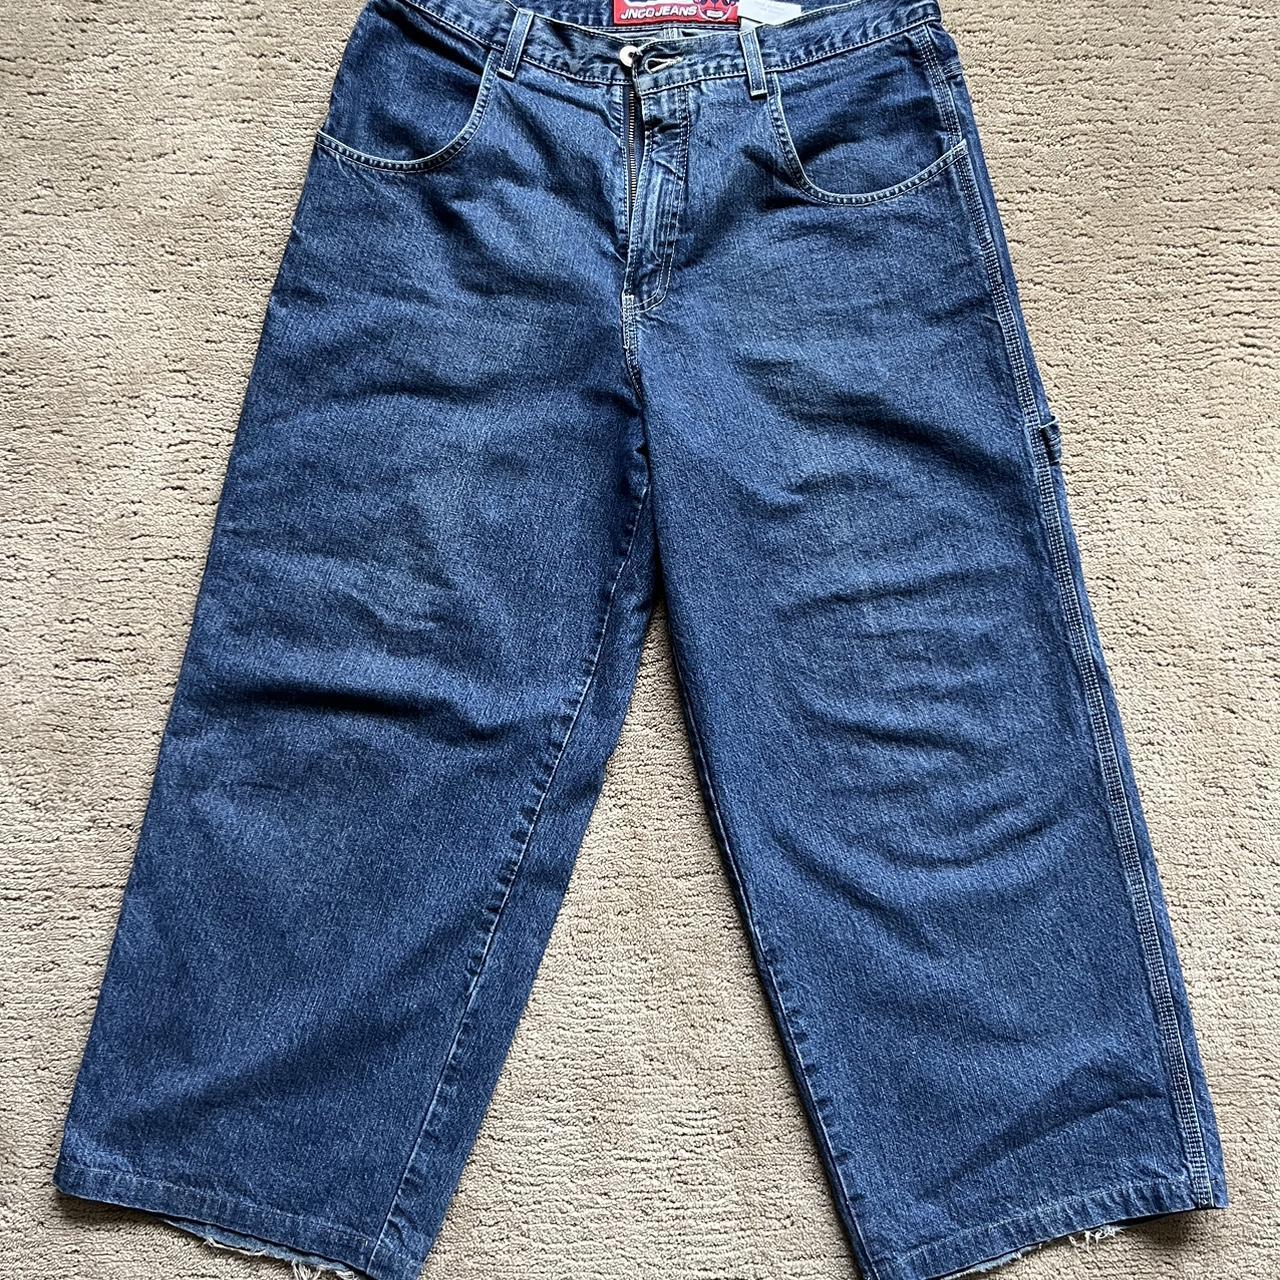 90s JNCO Carpenter Jeans • tagged 36x30 but fit... - Depop